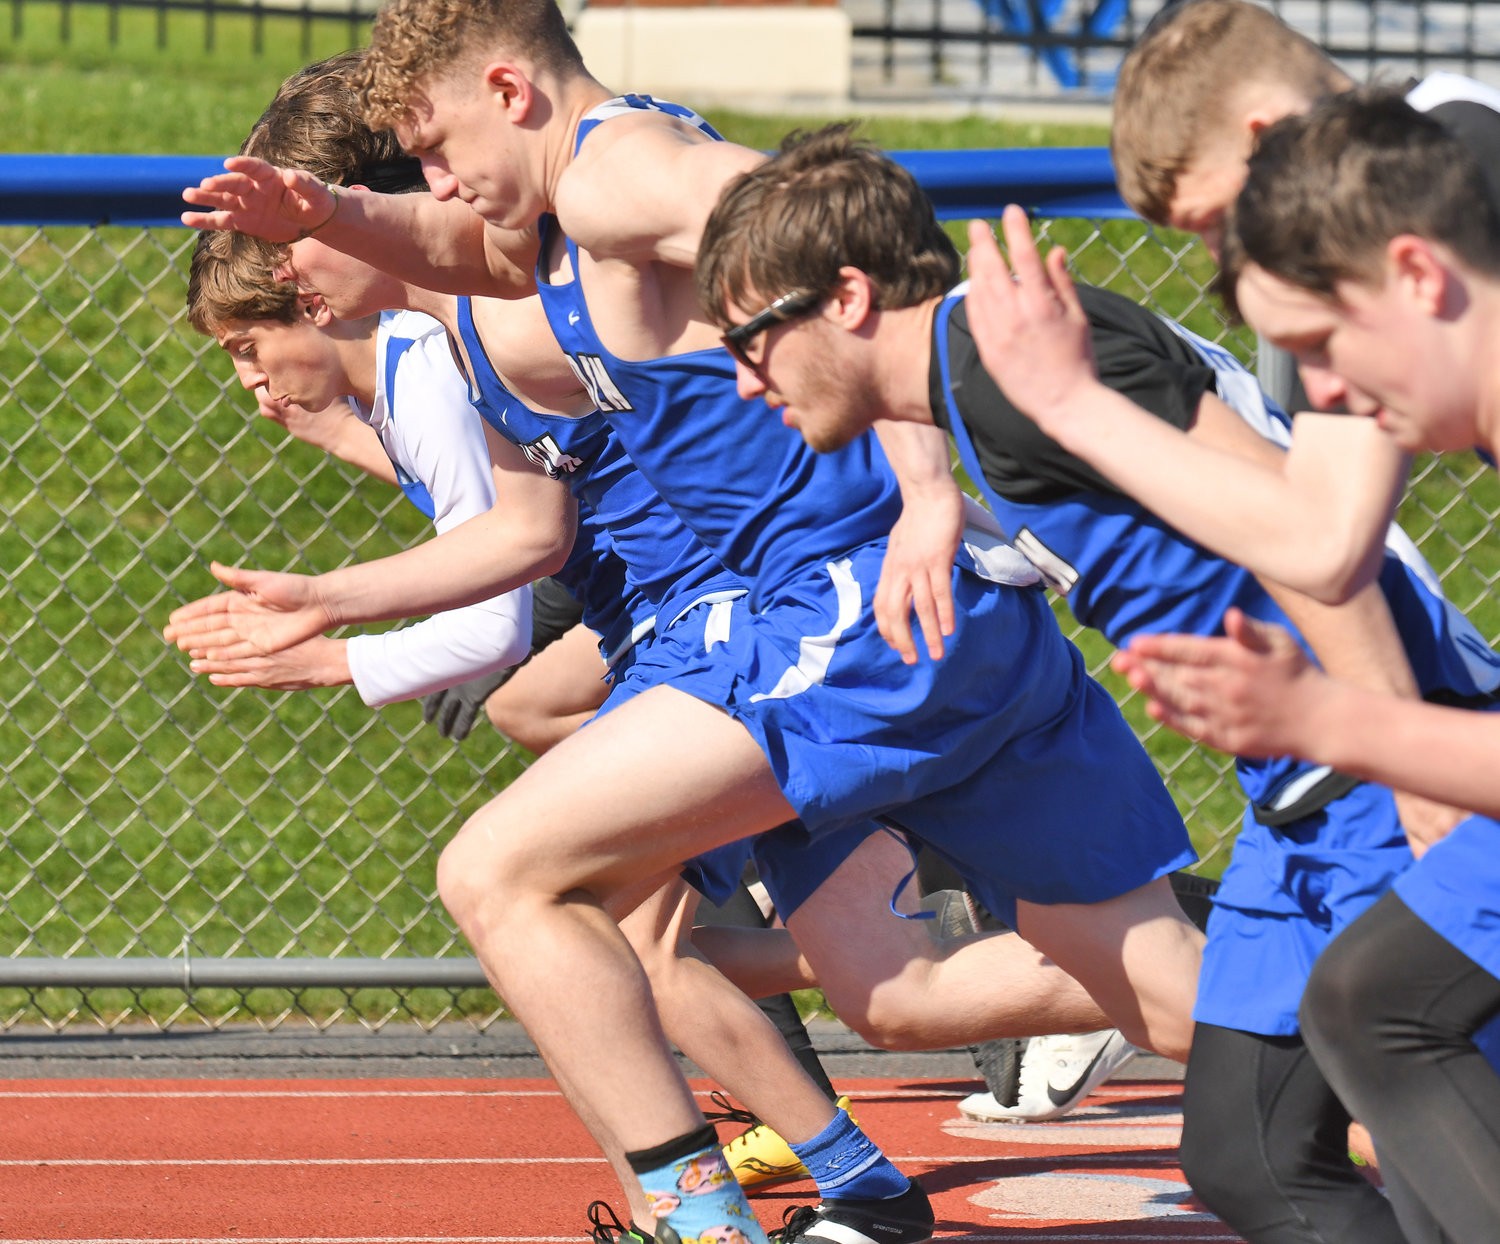 AND THEY’RE OFF — Participants take off at the start of the boys 100-meter dash with Camden and Whitesboro competiting in Wednesday’s Tri-Valley League meet in Whitesboro. Meet details were unavailable as of press time.